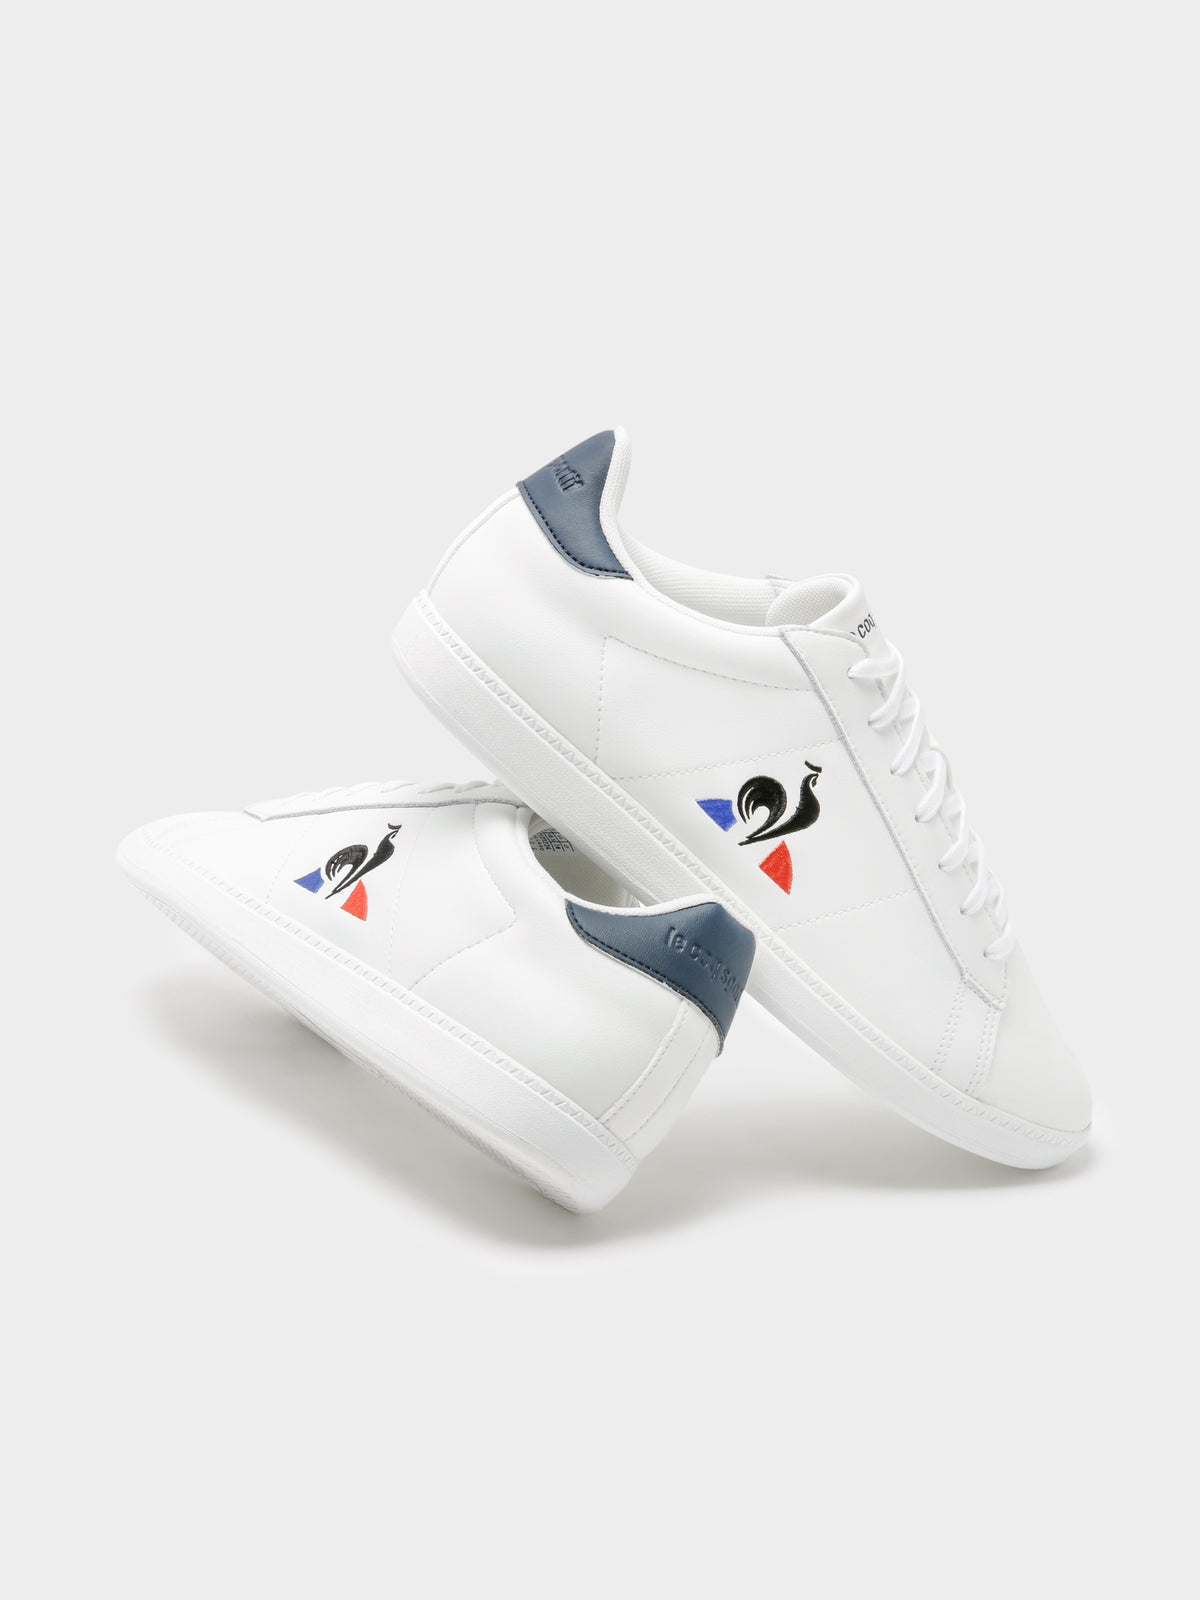 Mens Courtset Leather Sneakers in White &amp; Navy